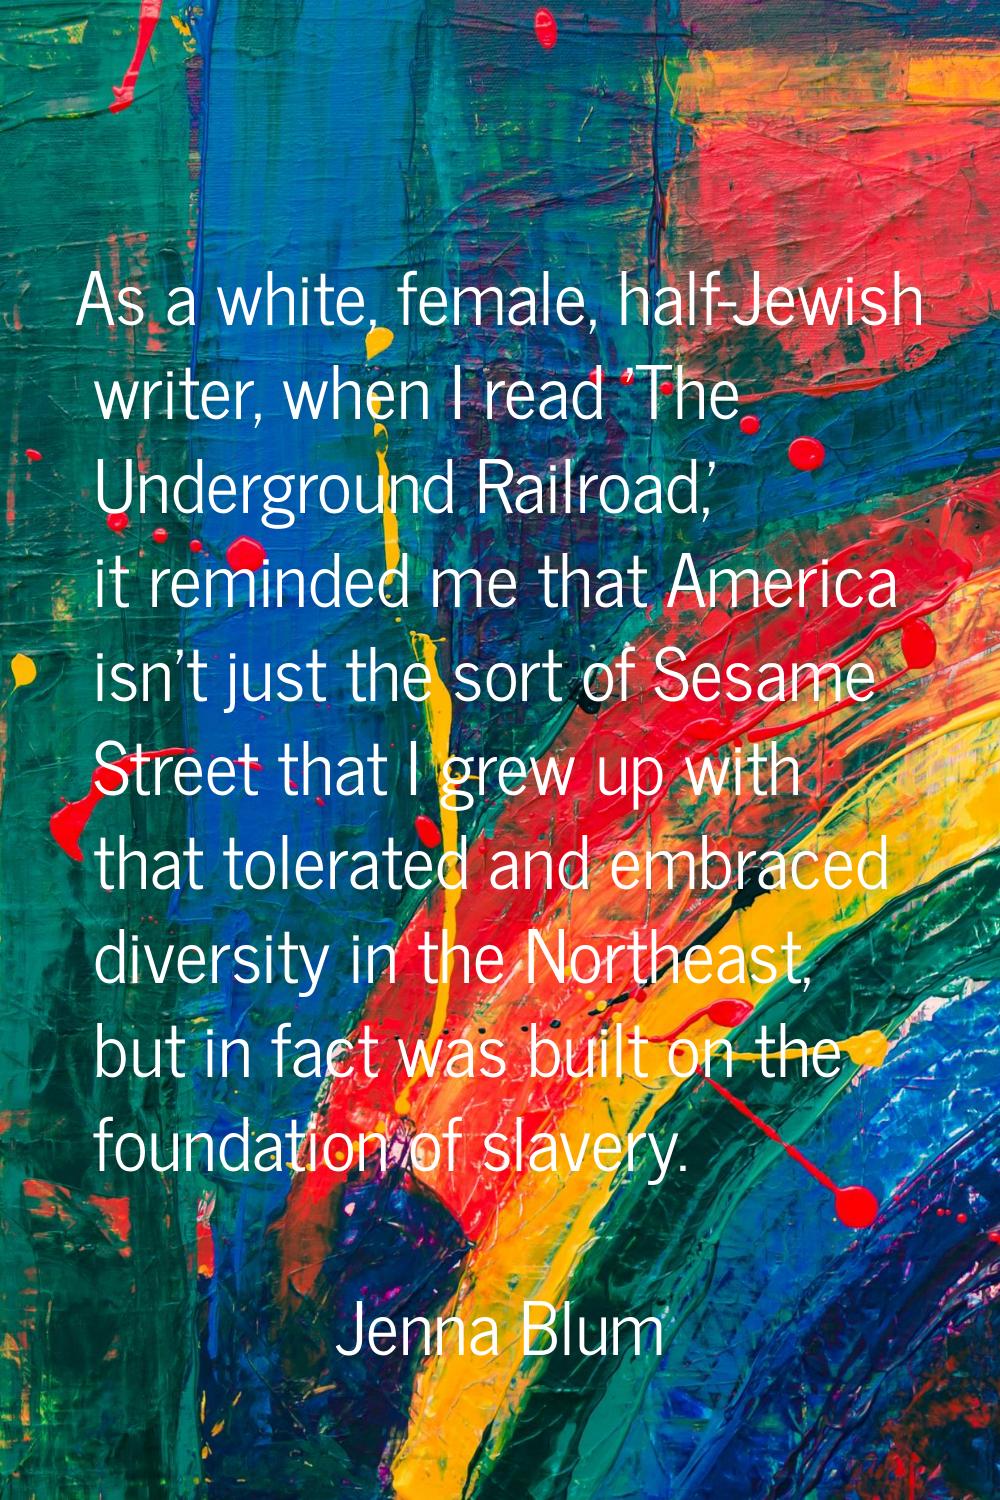 As a white, female, half-Jewish writer, when I read 'The Underground Railroad,' it reminded me that